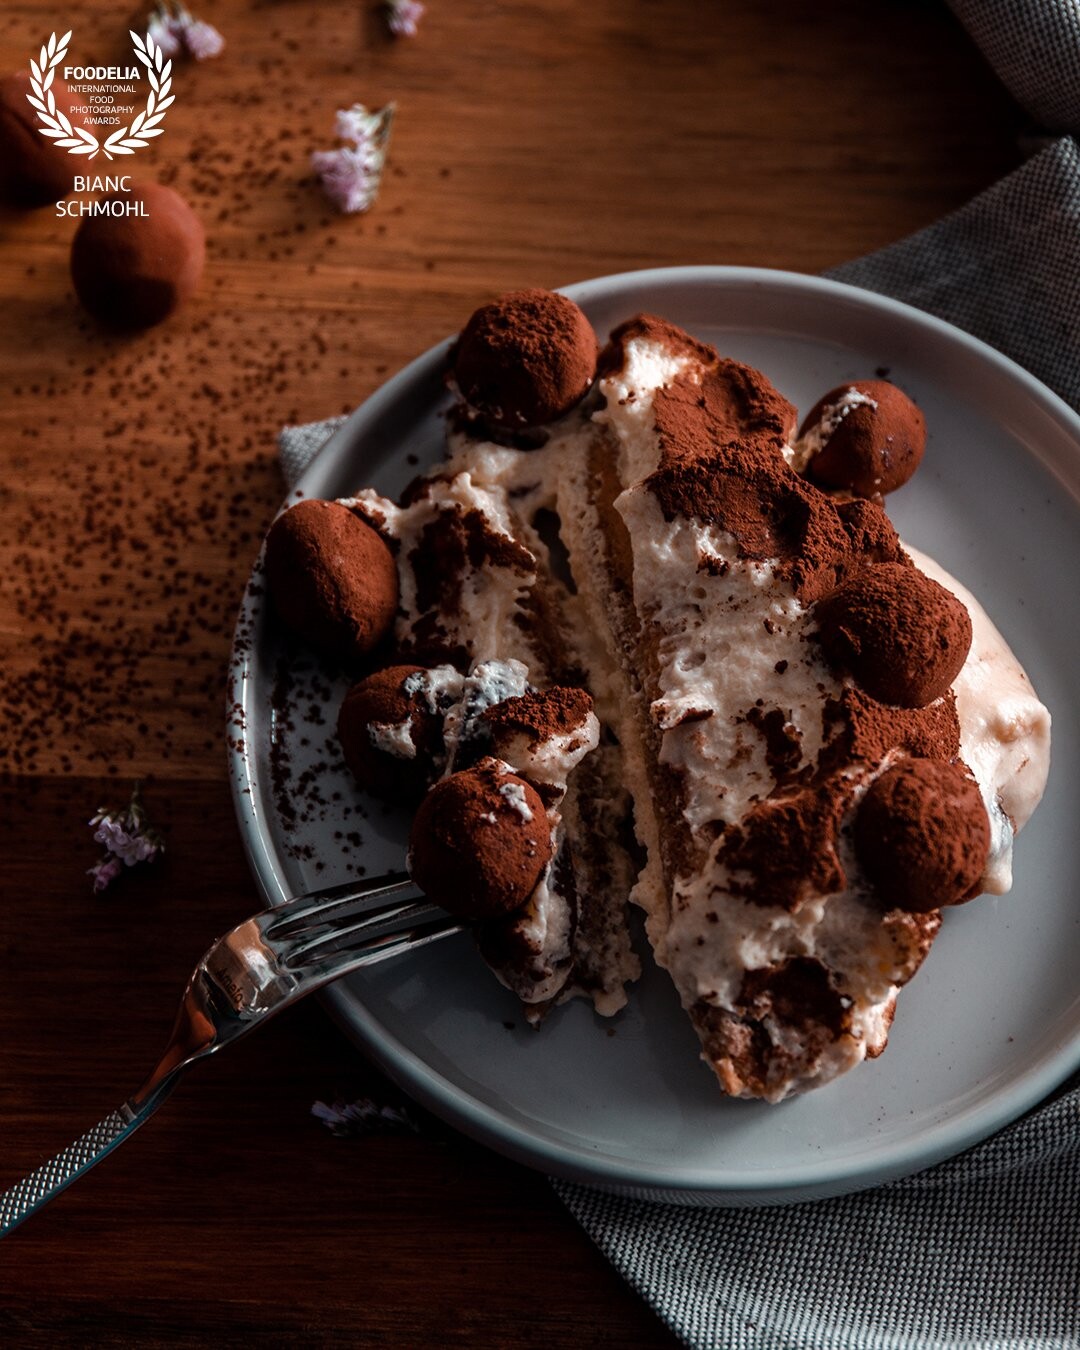 Tiramisu with a touch of marzipan. Such a great dish to vary with ingredients, staying true to the authenticity of the basic recipe. And definititely a photo which whets your appetite!